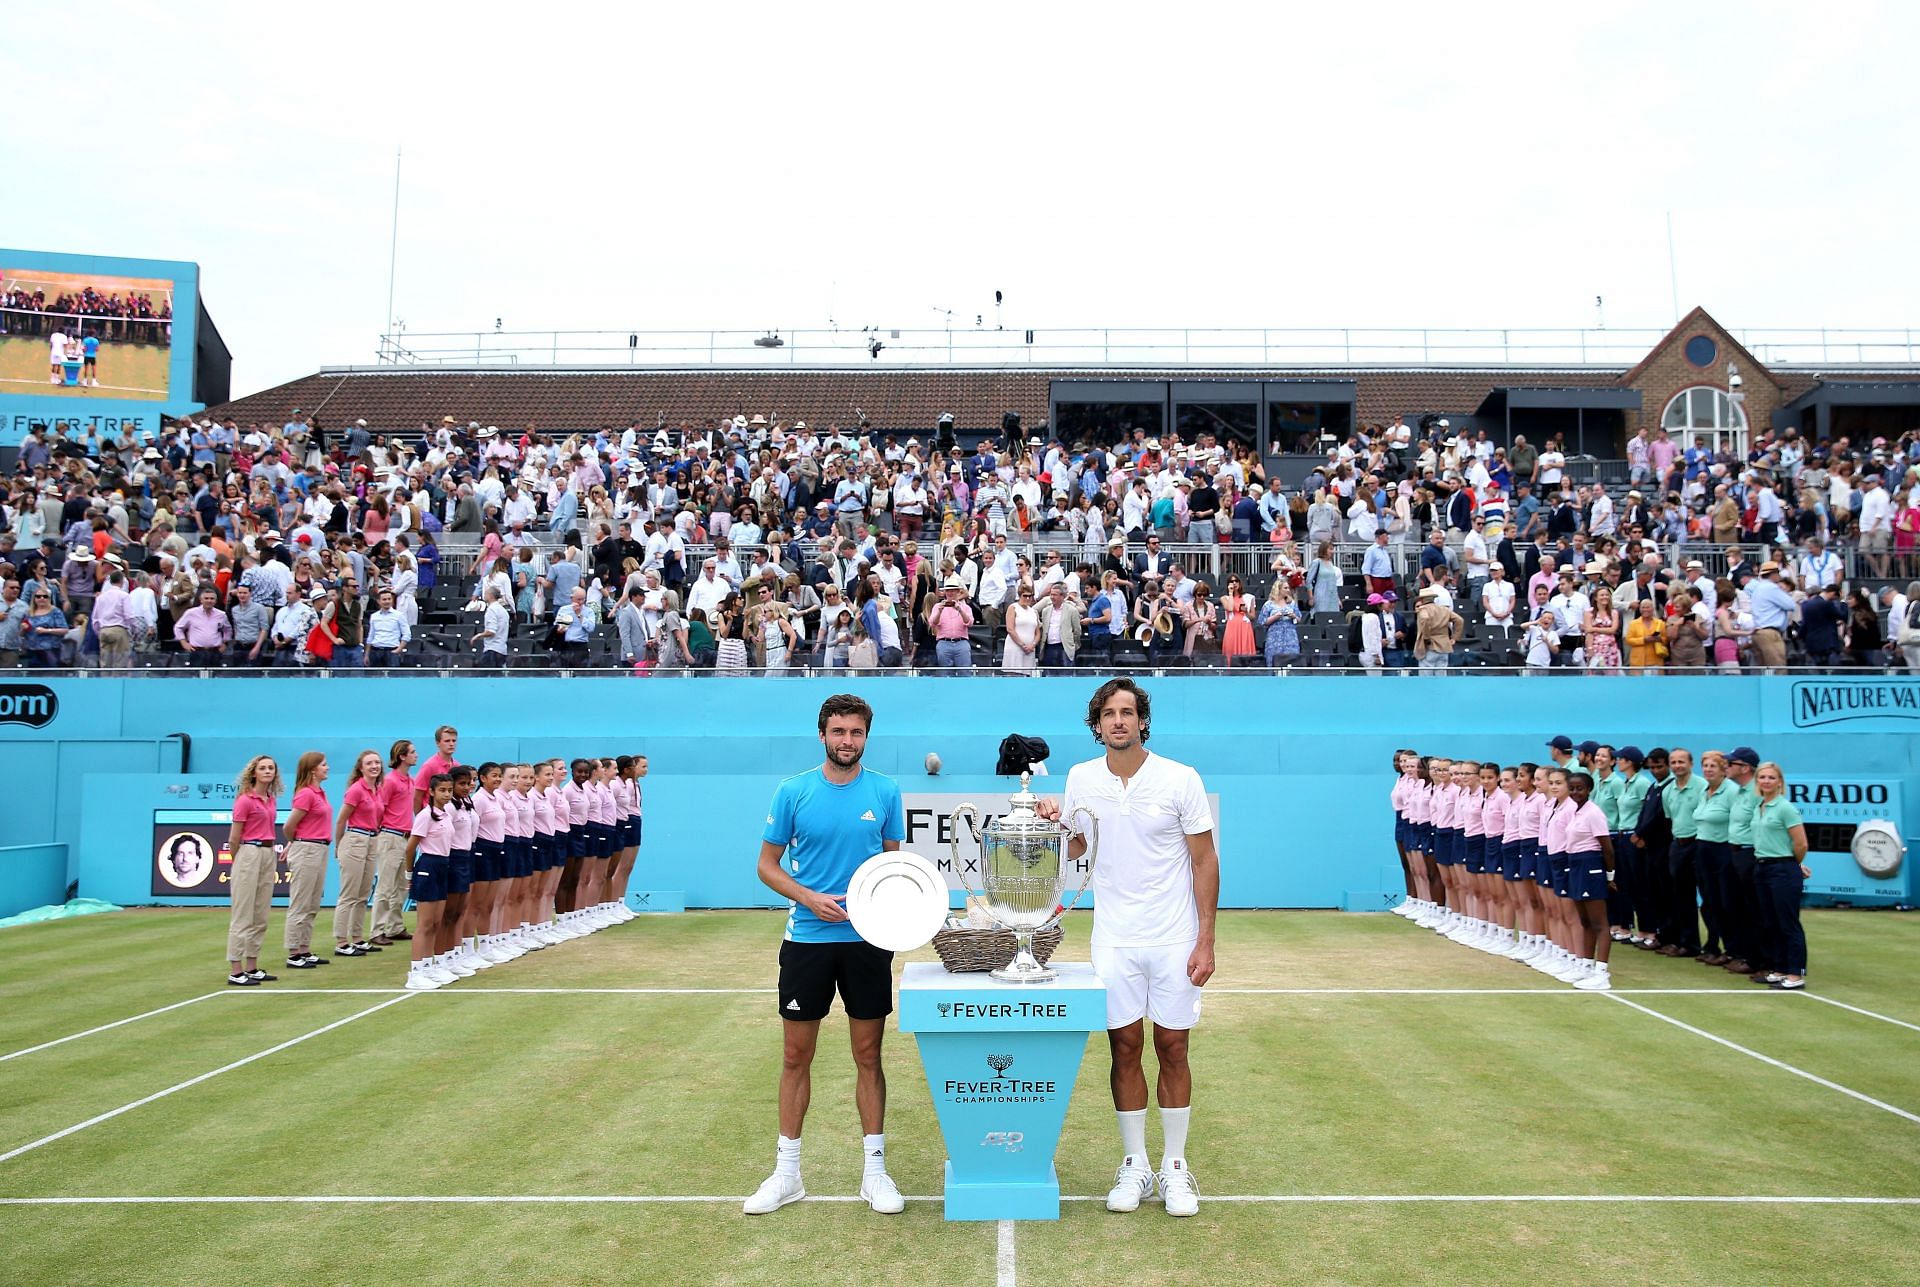 Feliciano Lopez along with runner-up Gilles Simon at the Queens Club in 2019